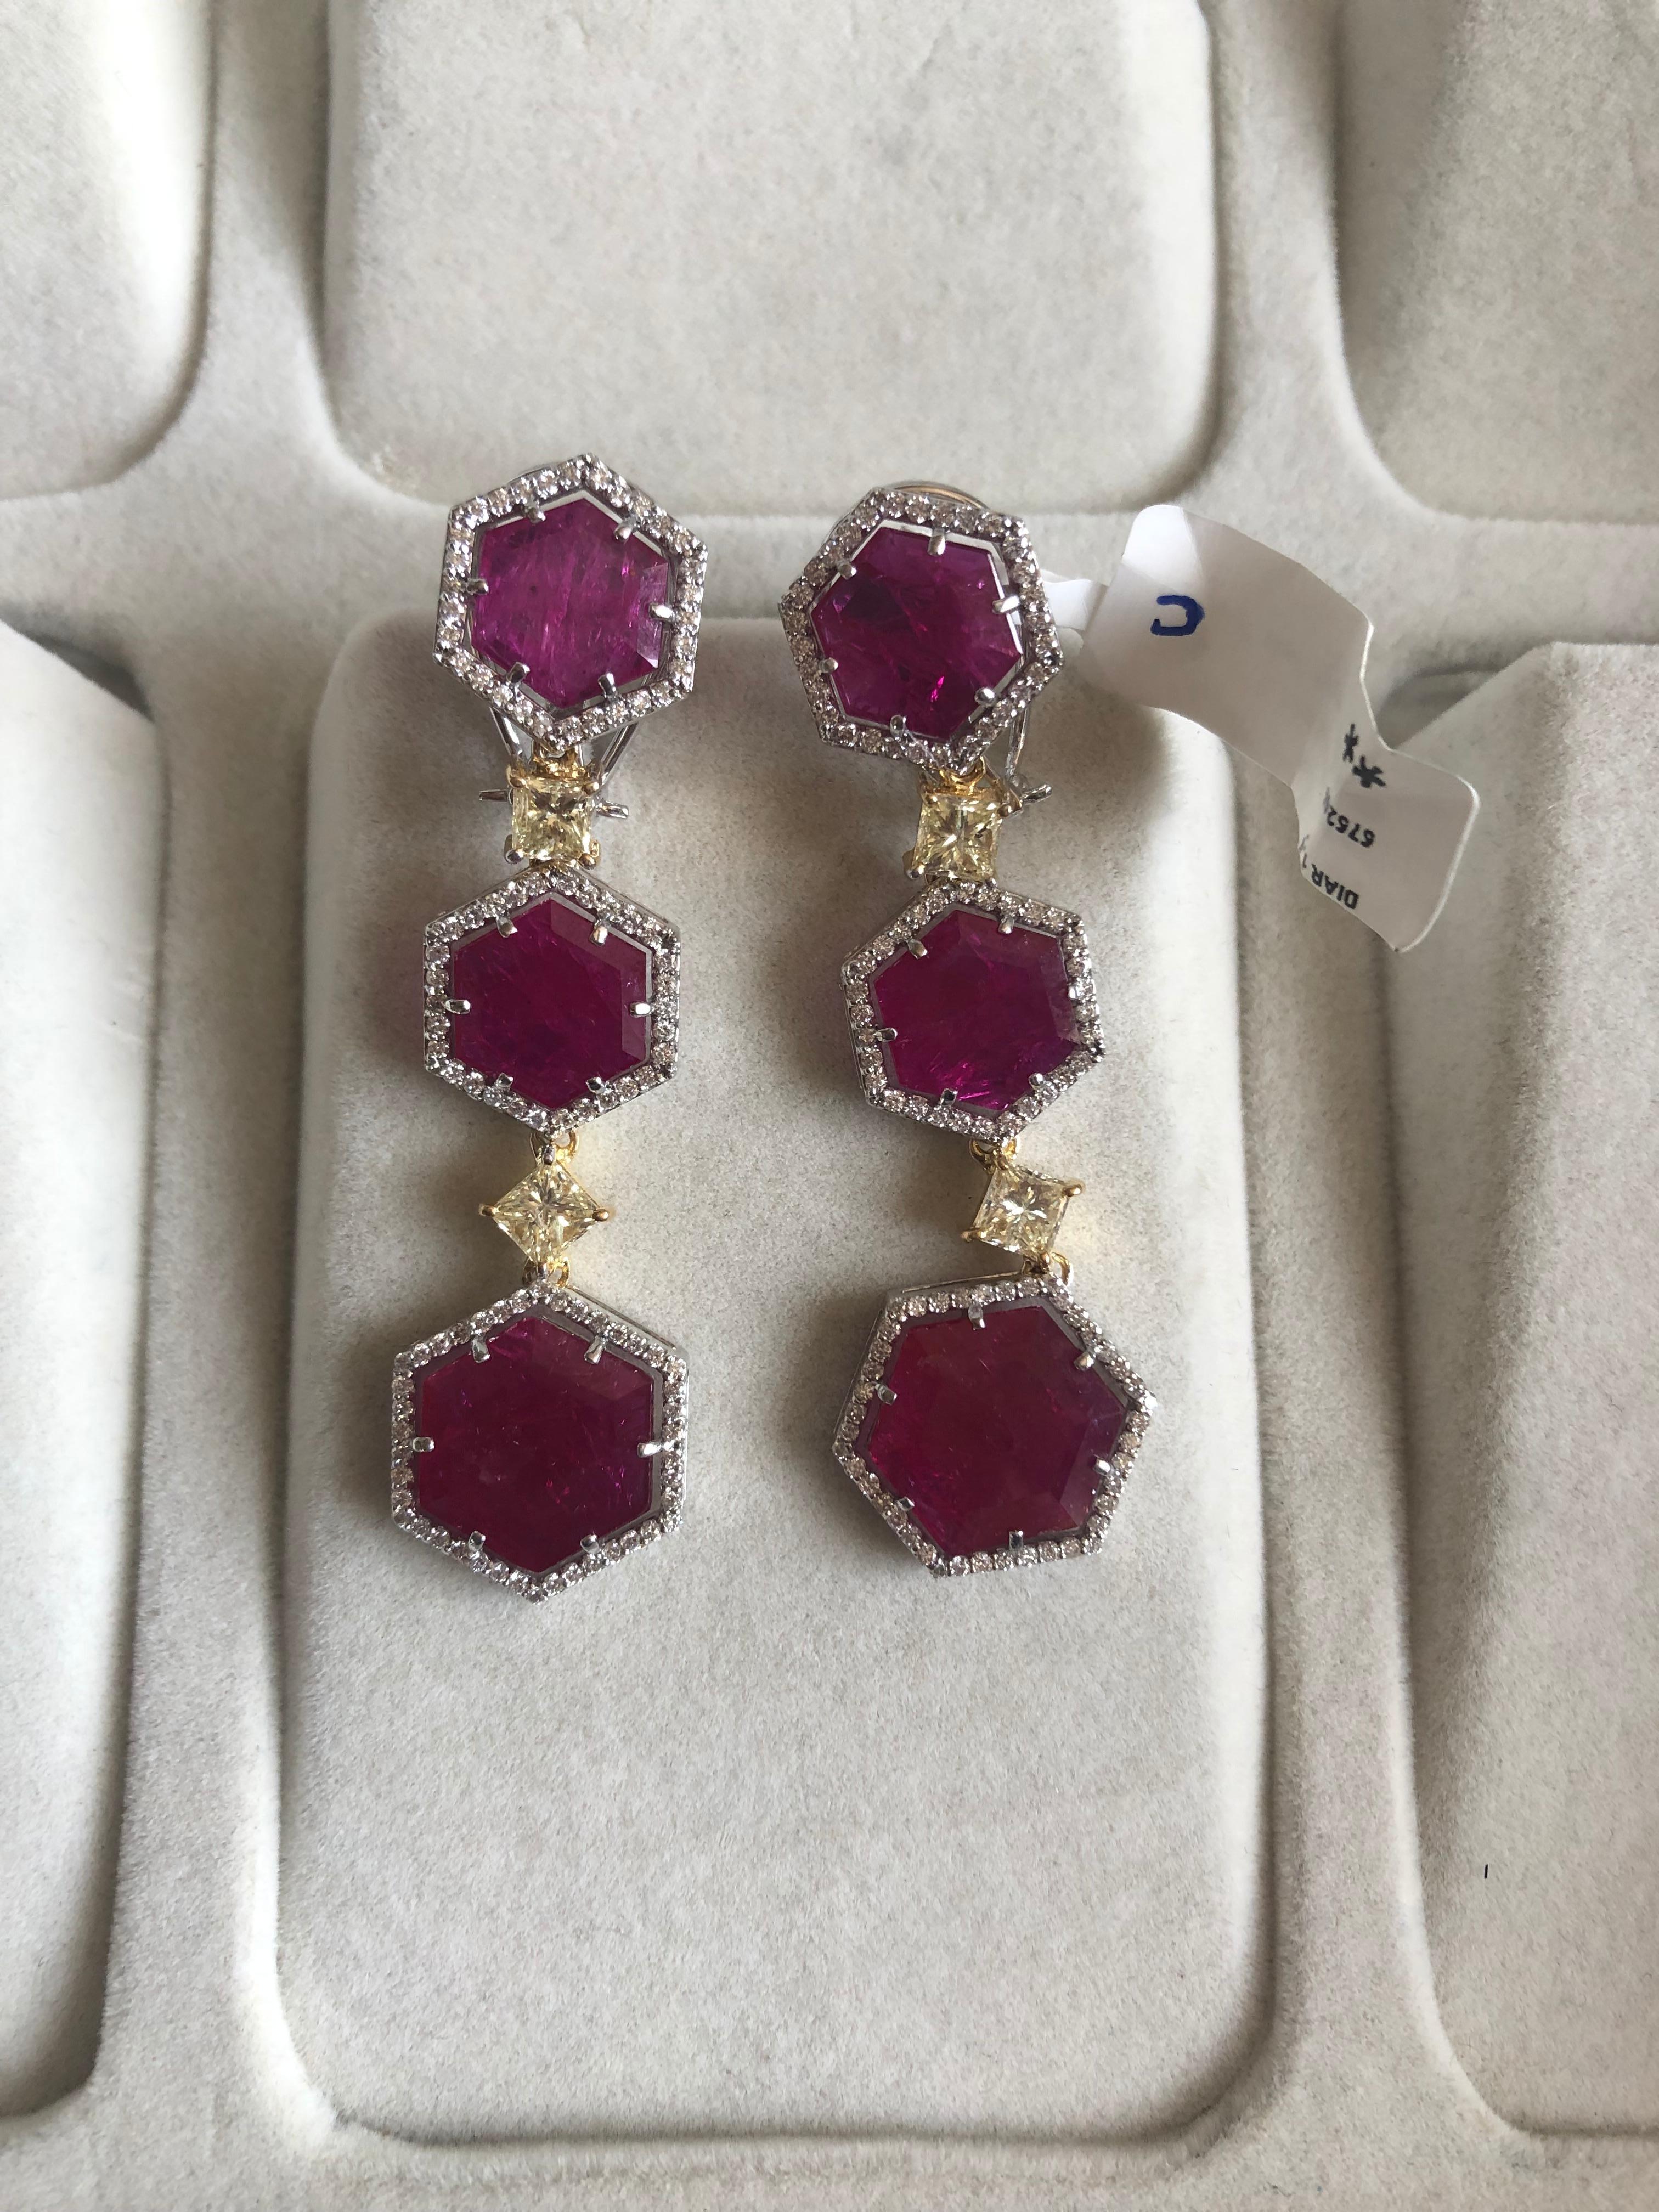 Modern Set in 18K gold, natural Mozambique Ruby and Princess Yellow Diamond Earrings